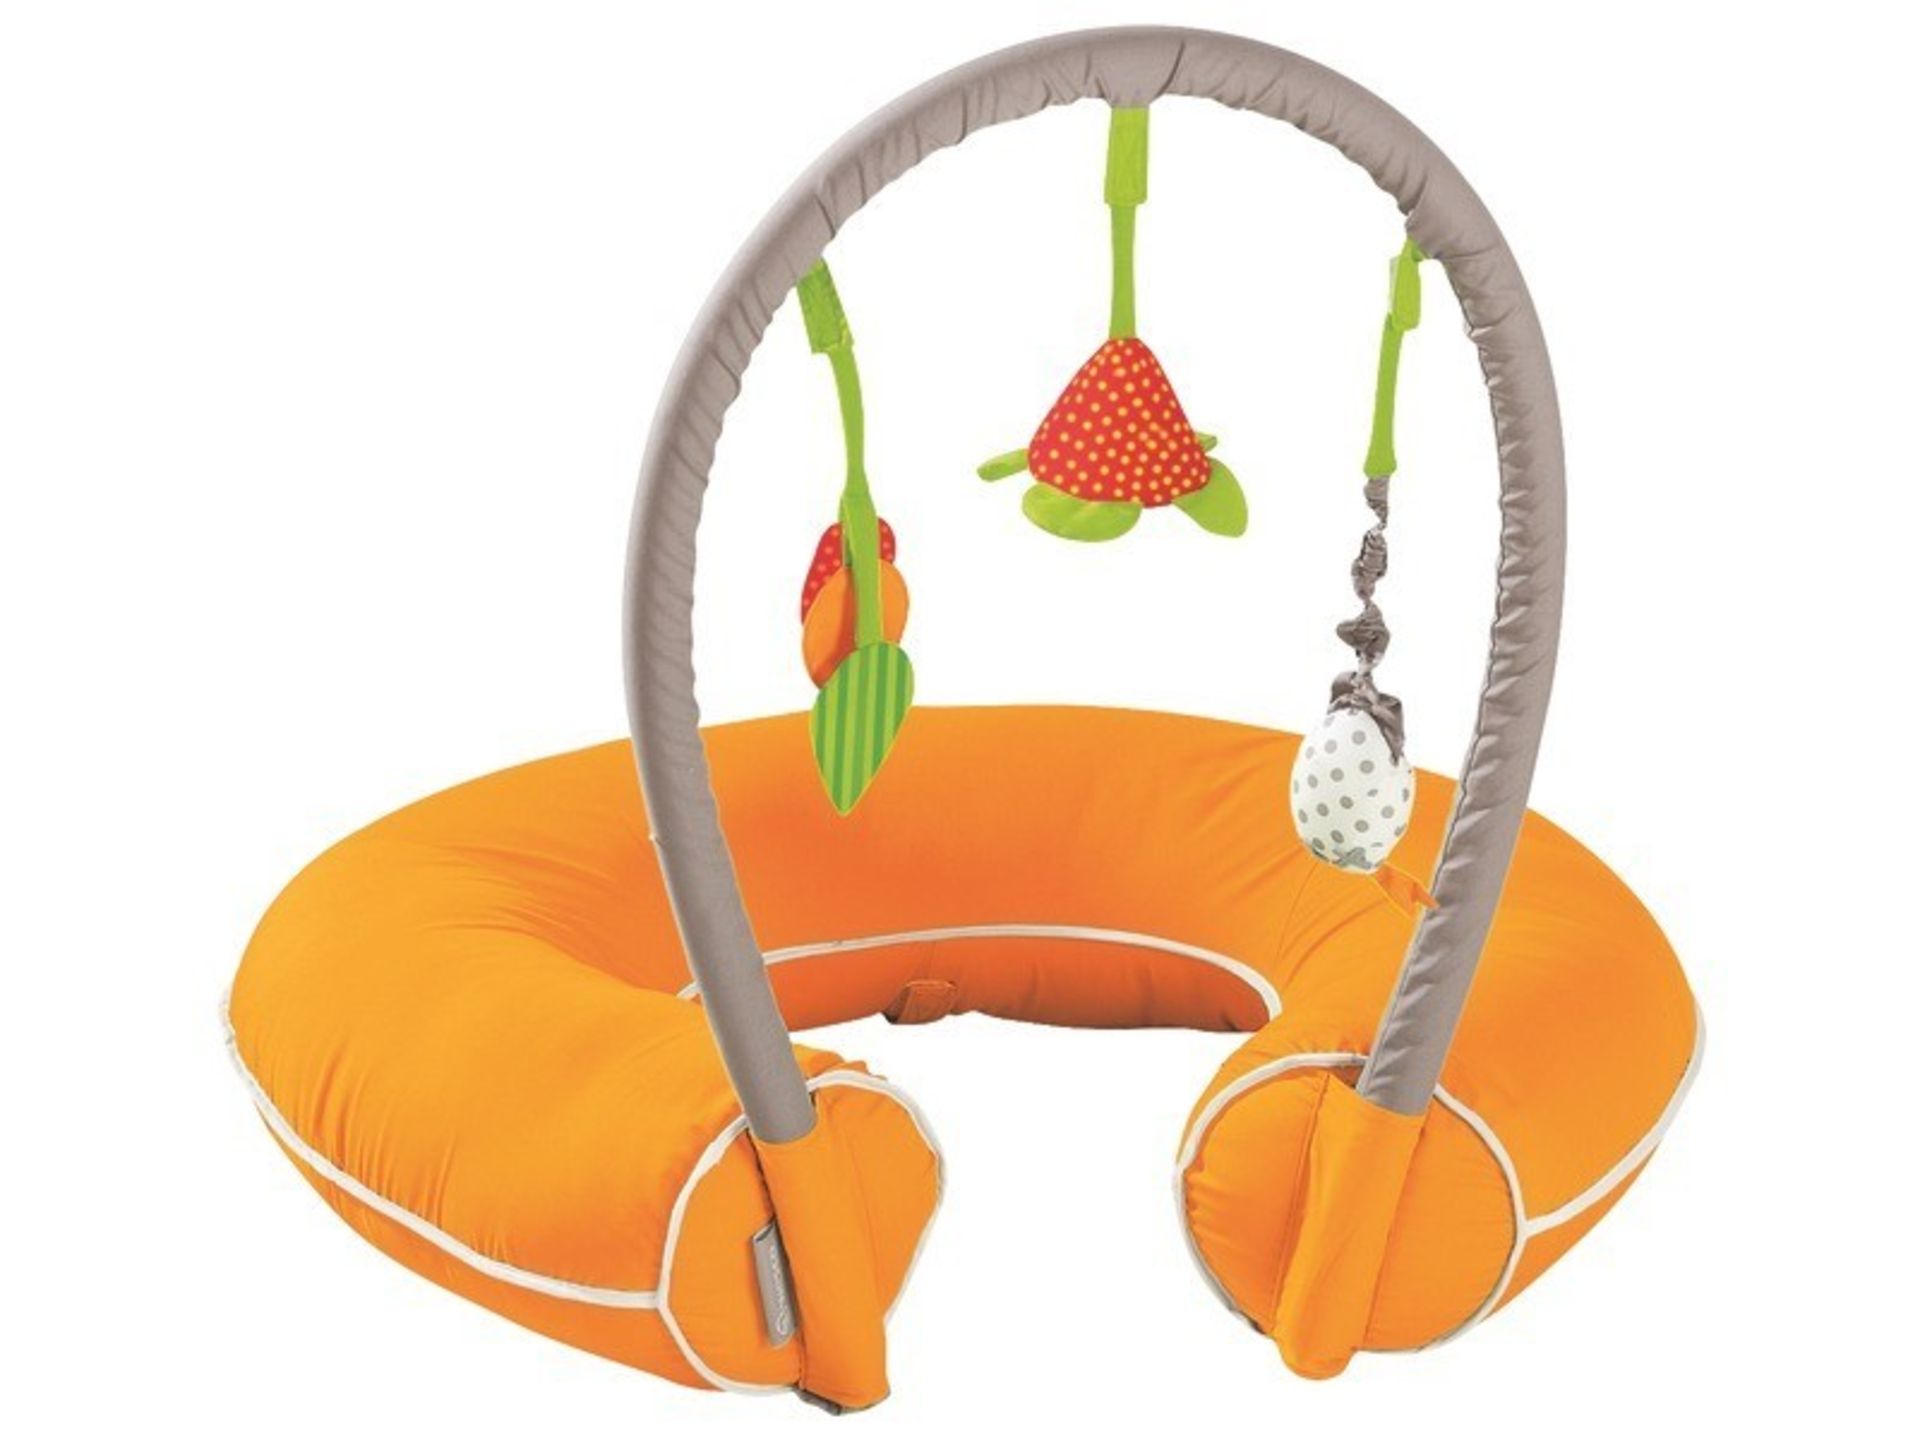 1 AS NEW BOXED WESCO EARLY LEARNING CUSHION IN ORANGE / RRP £49.99 (VIEWING HIGHLY RECOMMENDED)